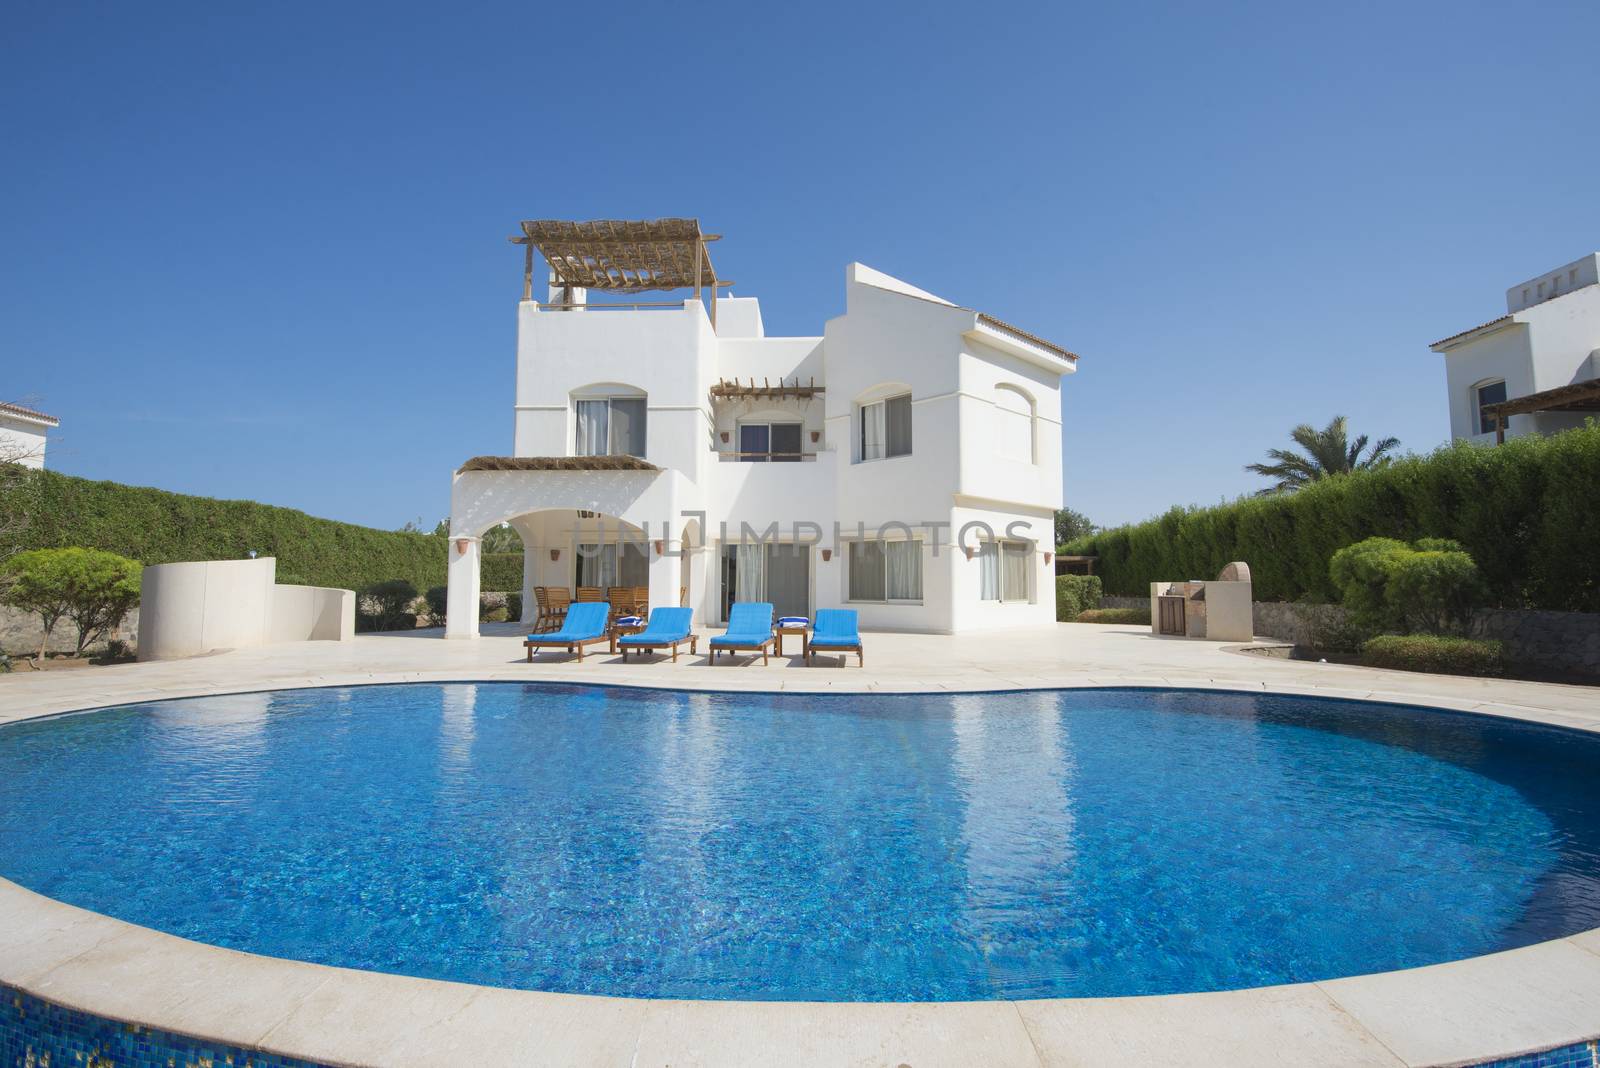 Luxury villa show home in tropical summer holiday resort with swimming pool and sun loungers